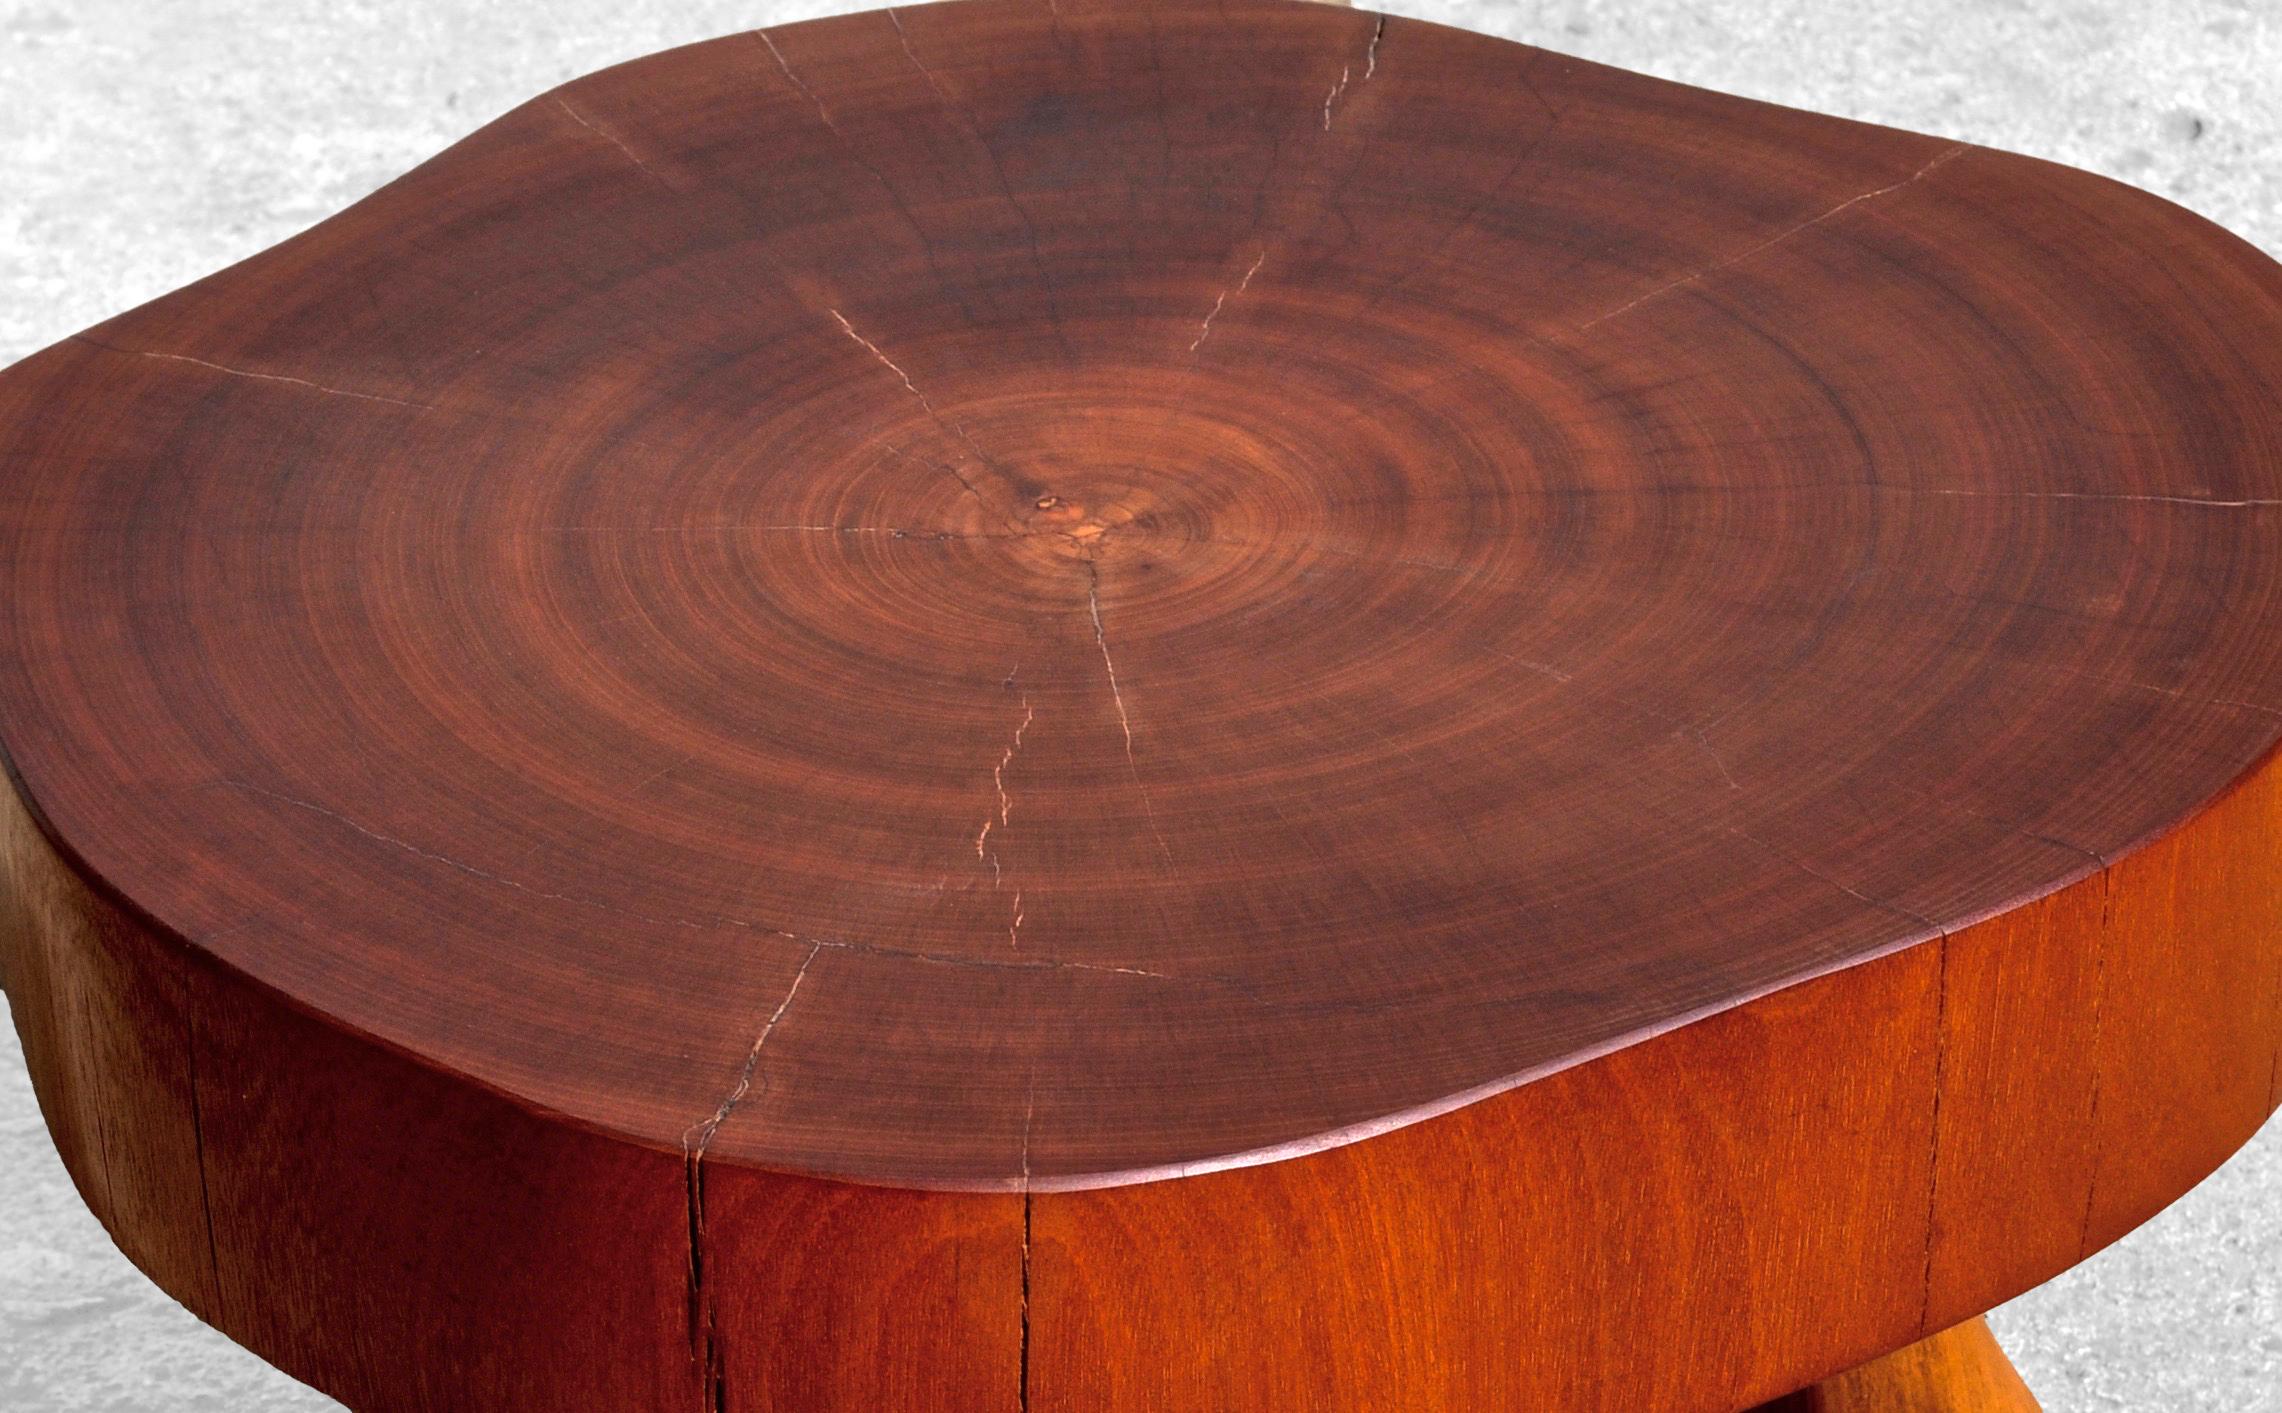 Unique walnut signed table by Jörg Pietschmann
Materials: Padouk, European walnut
Measures: W 64 x D 63 x H 43 cm

In Pietschmann’s sculptures, trees that for centuries were part of a landscape and founded in primordial forces tell stories